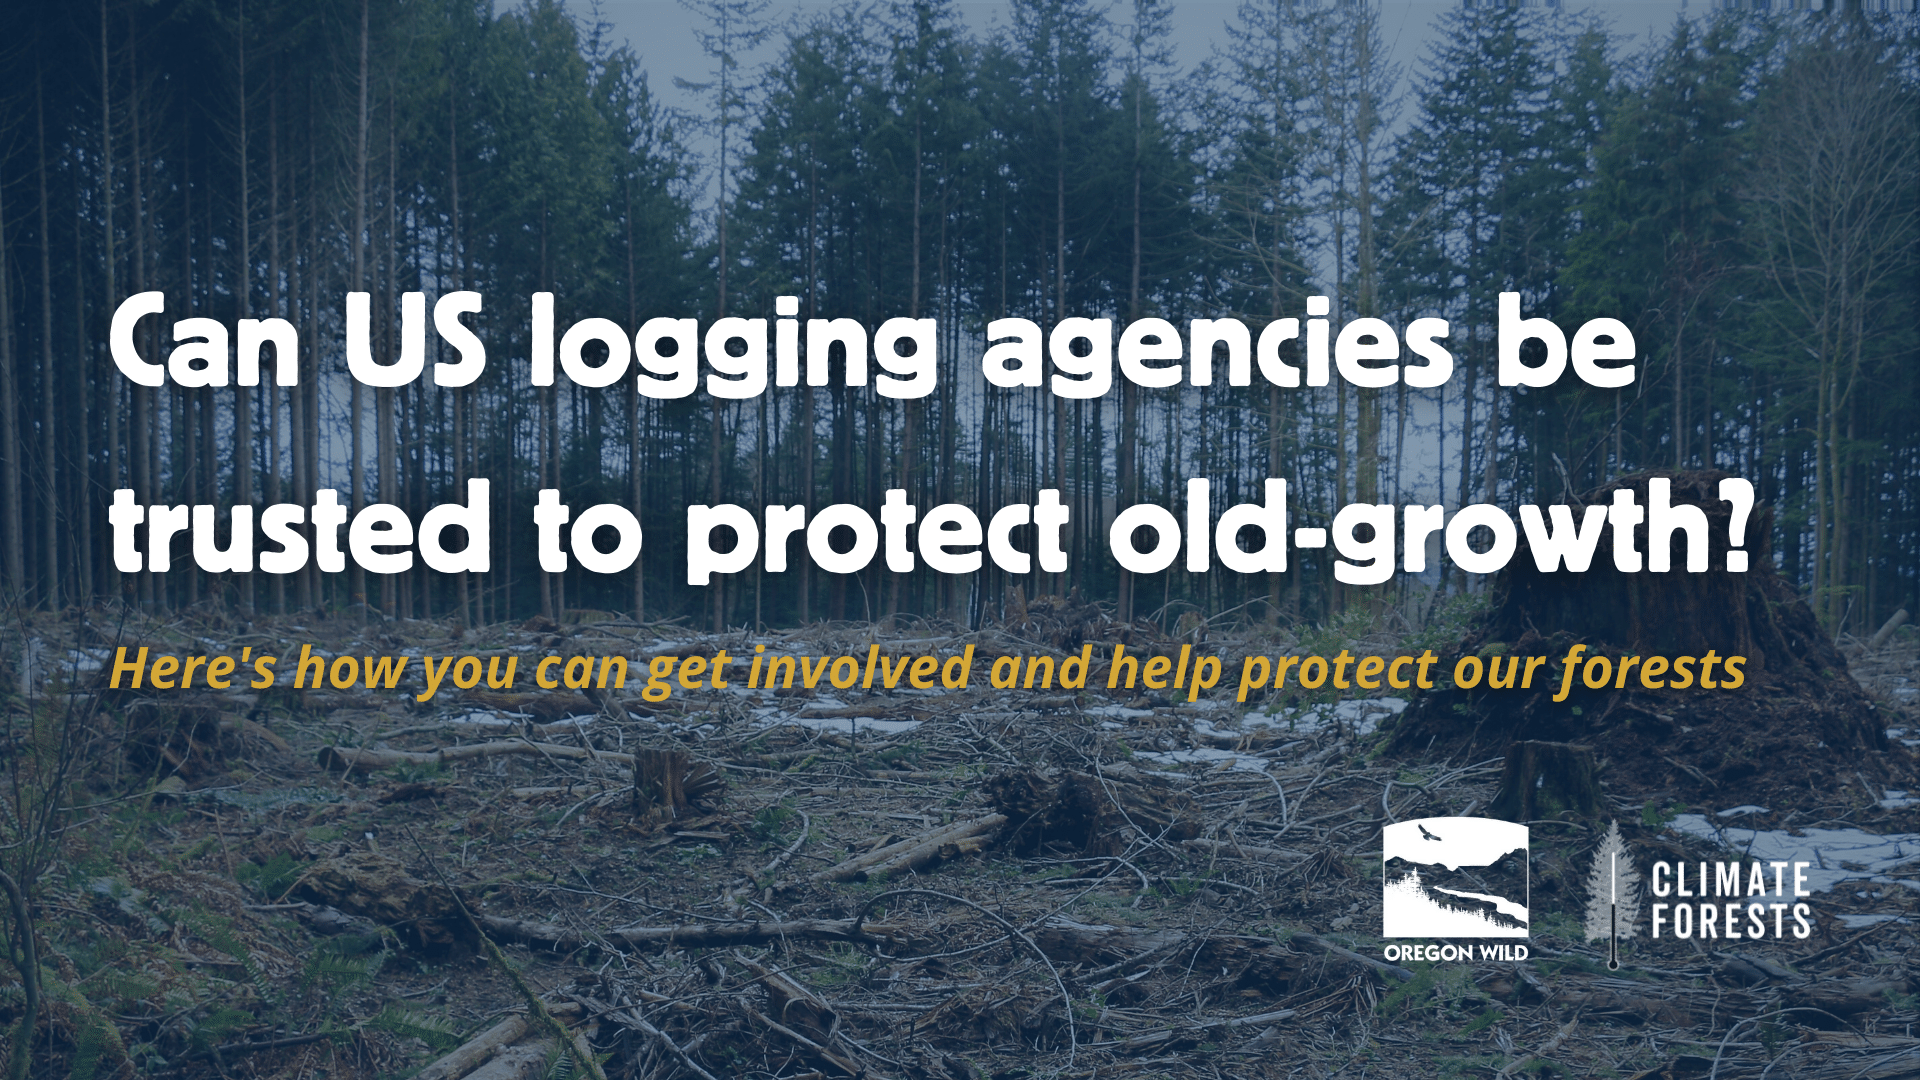 Can US logging agencies be trusted to protect old-growth? Here's how you can help